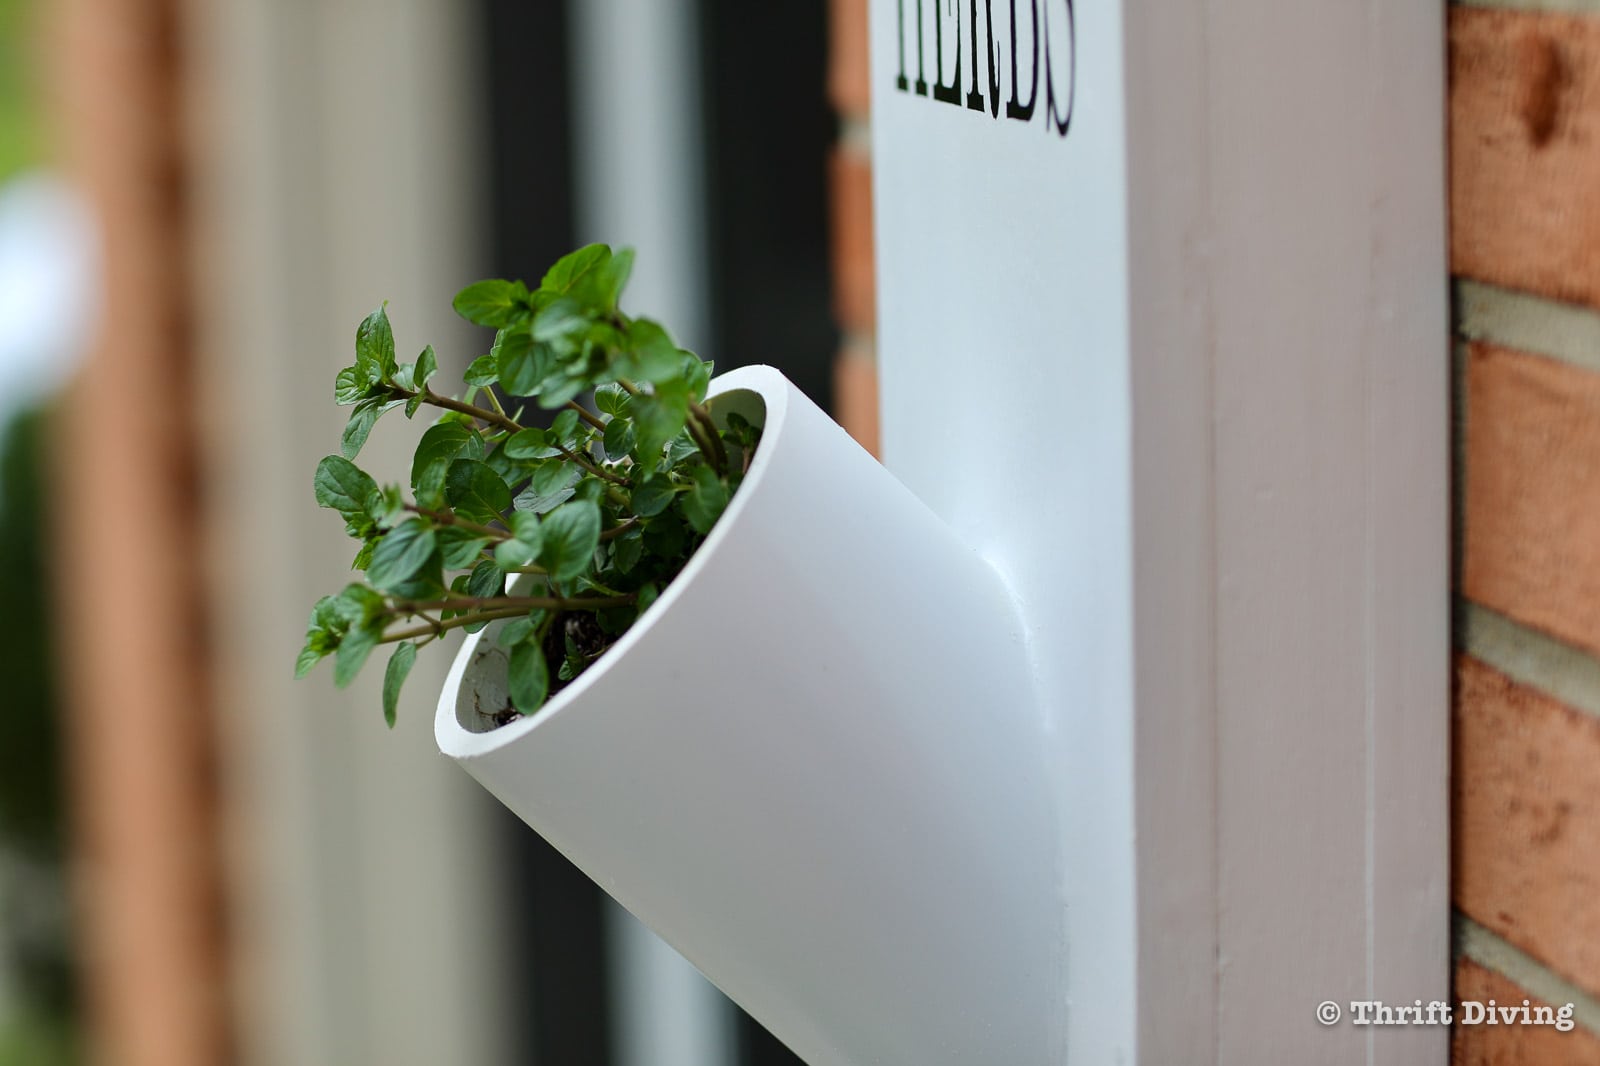 How to Make an Herb Garden Planter Using PVC Piping